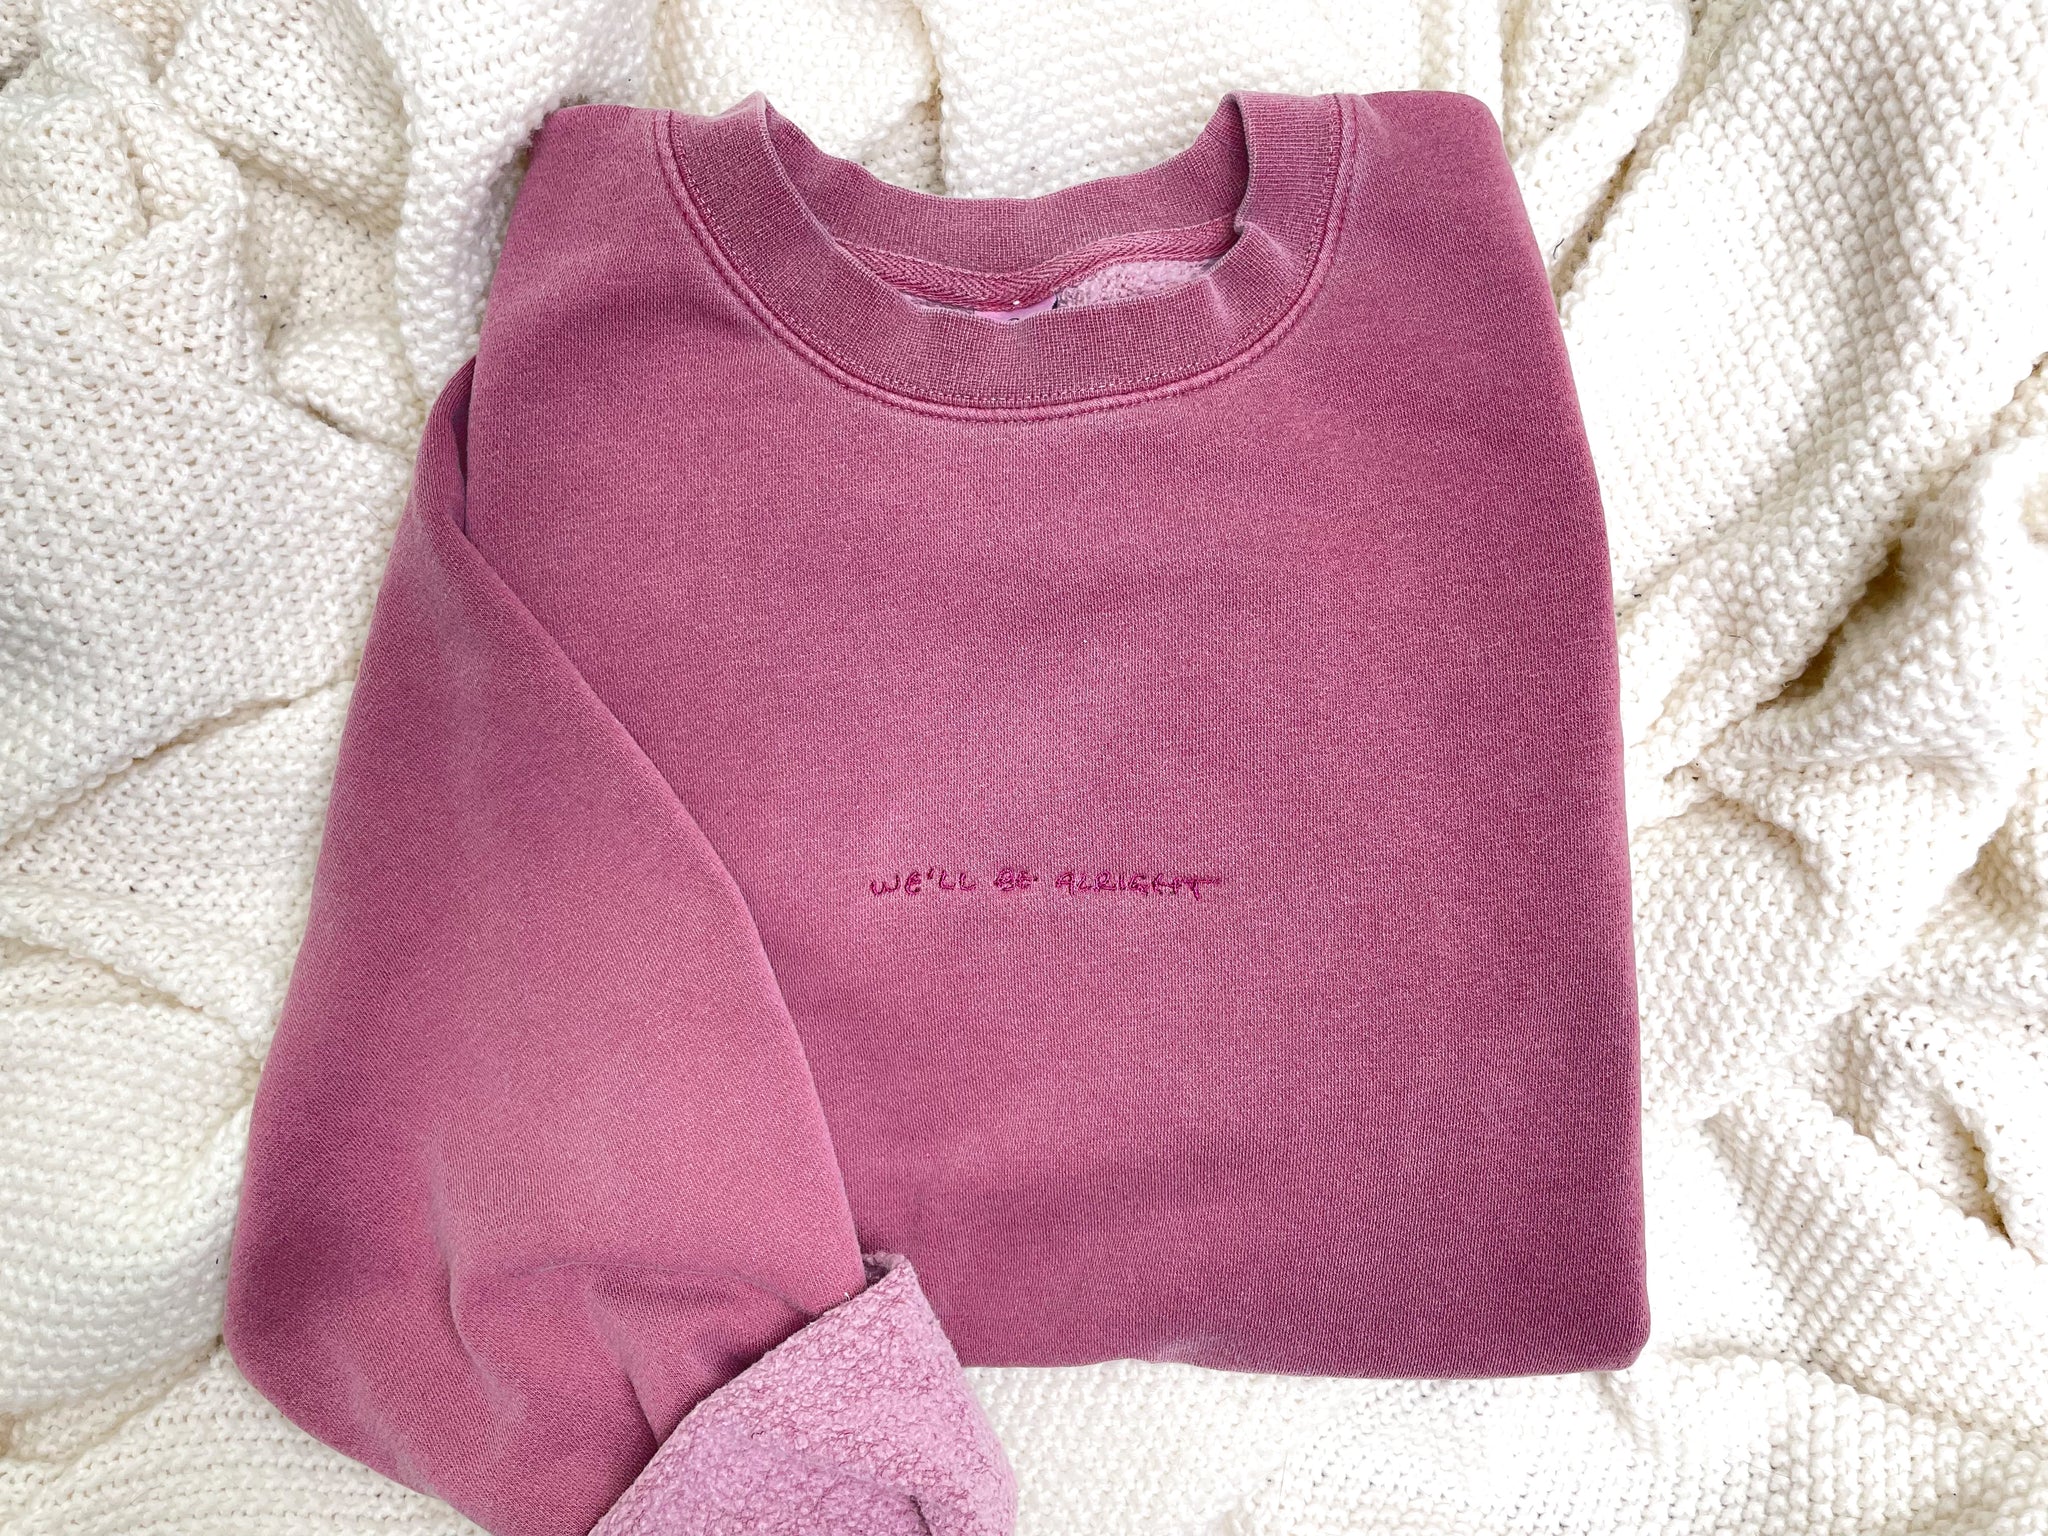 We'll Be Alright Machine Embroidered Sweatshirt